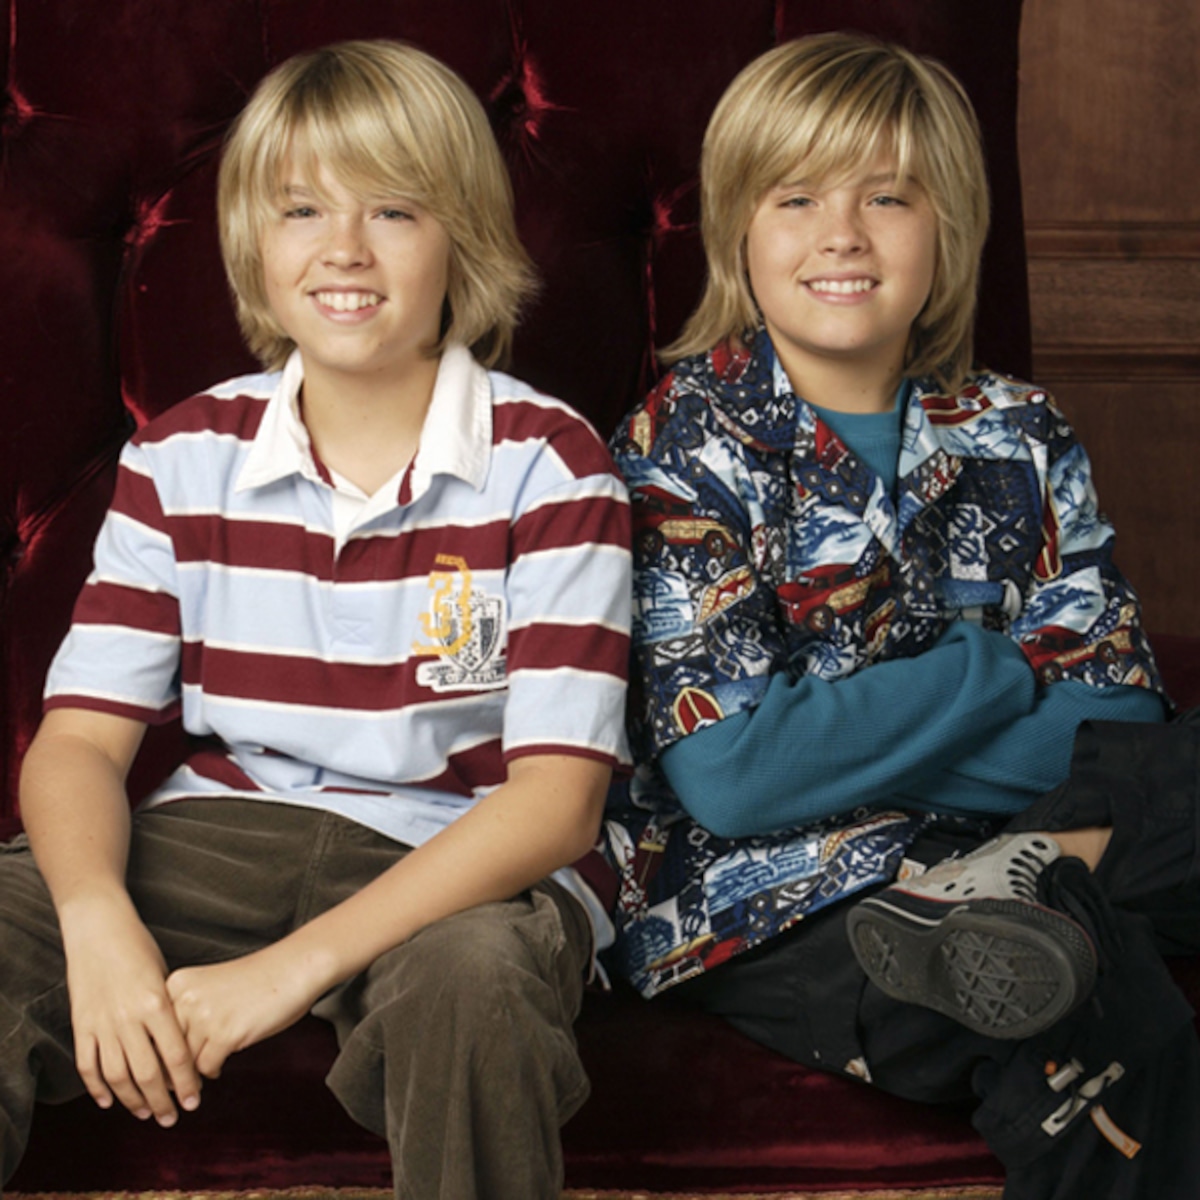 15 Secrets About The Suite Life of Zack and Cody Revealed - E! Online